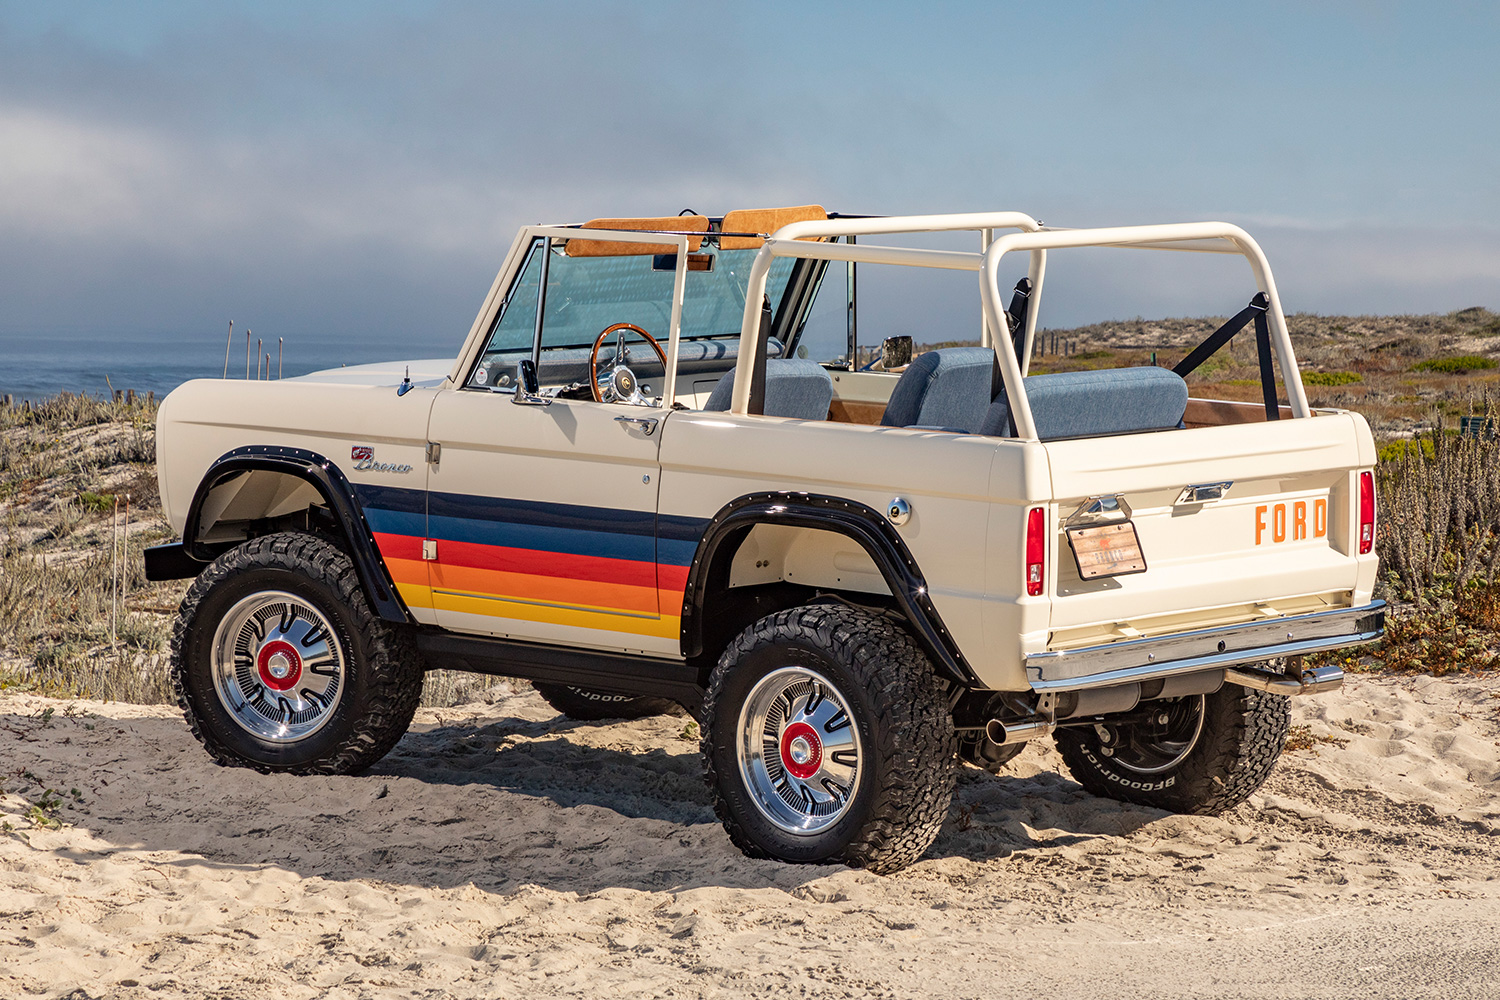 The Big Sur Love, an $800,000 version of the Luxe GT from Gateway Bronco